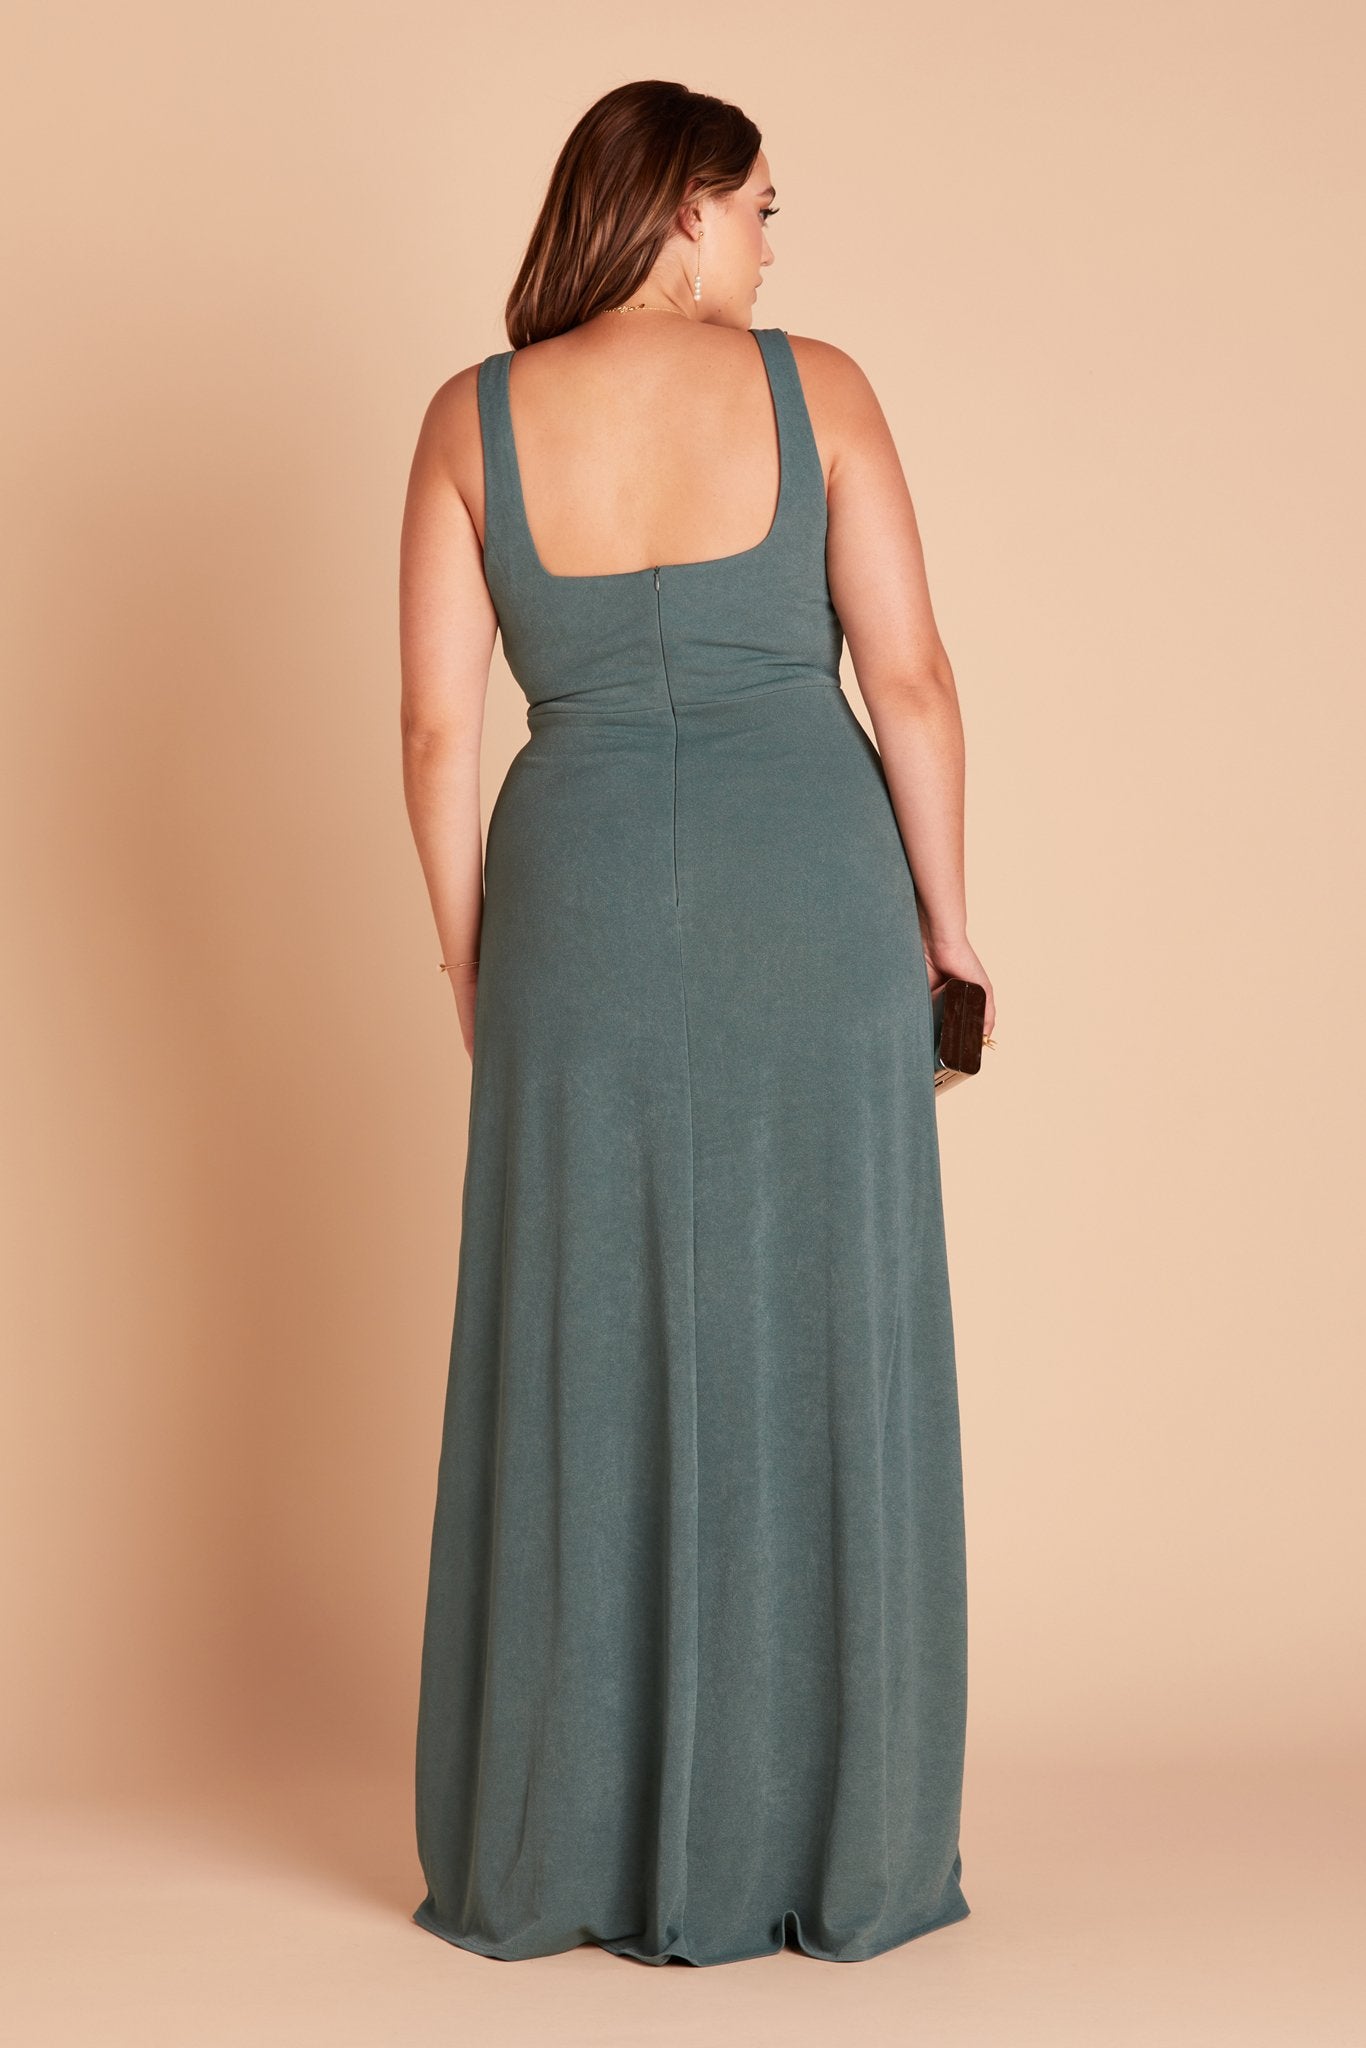 Alex convertible plus size bridesmaid dress with slit in sea glass green crepe by Birdy Grey, back view